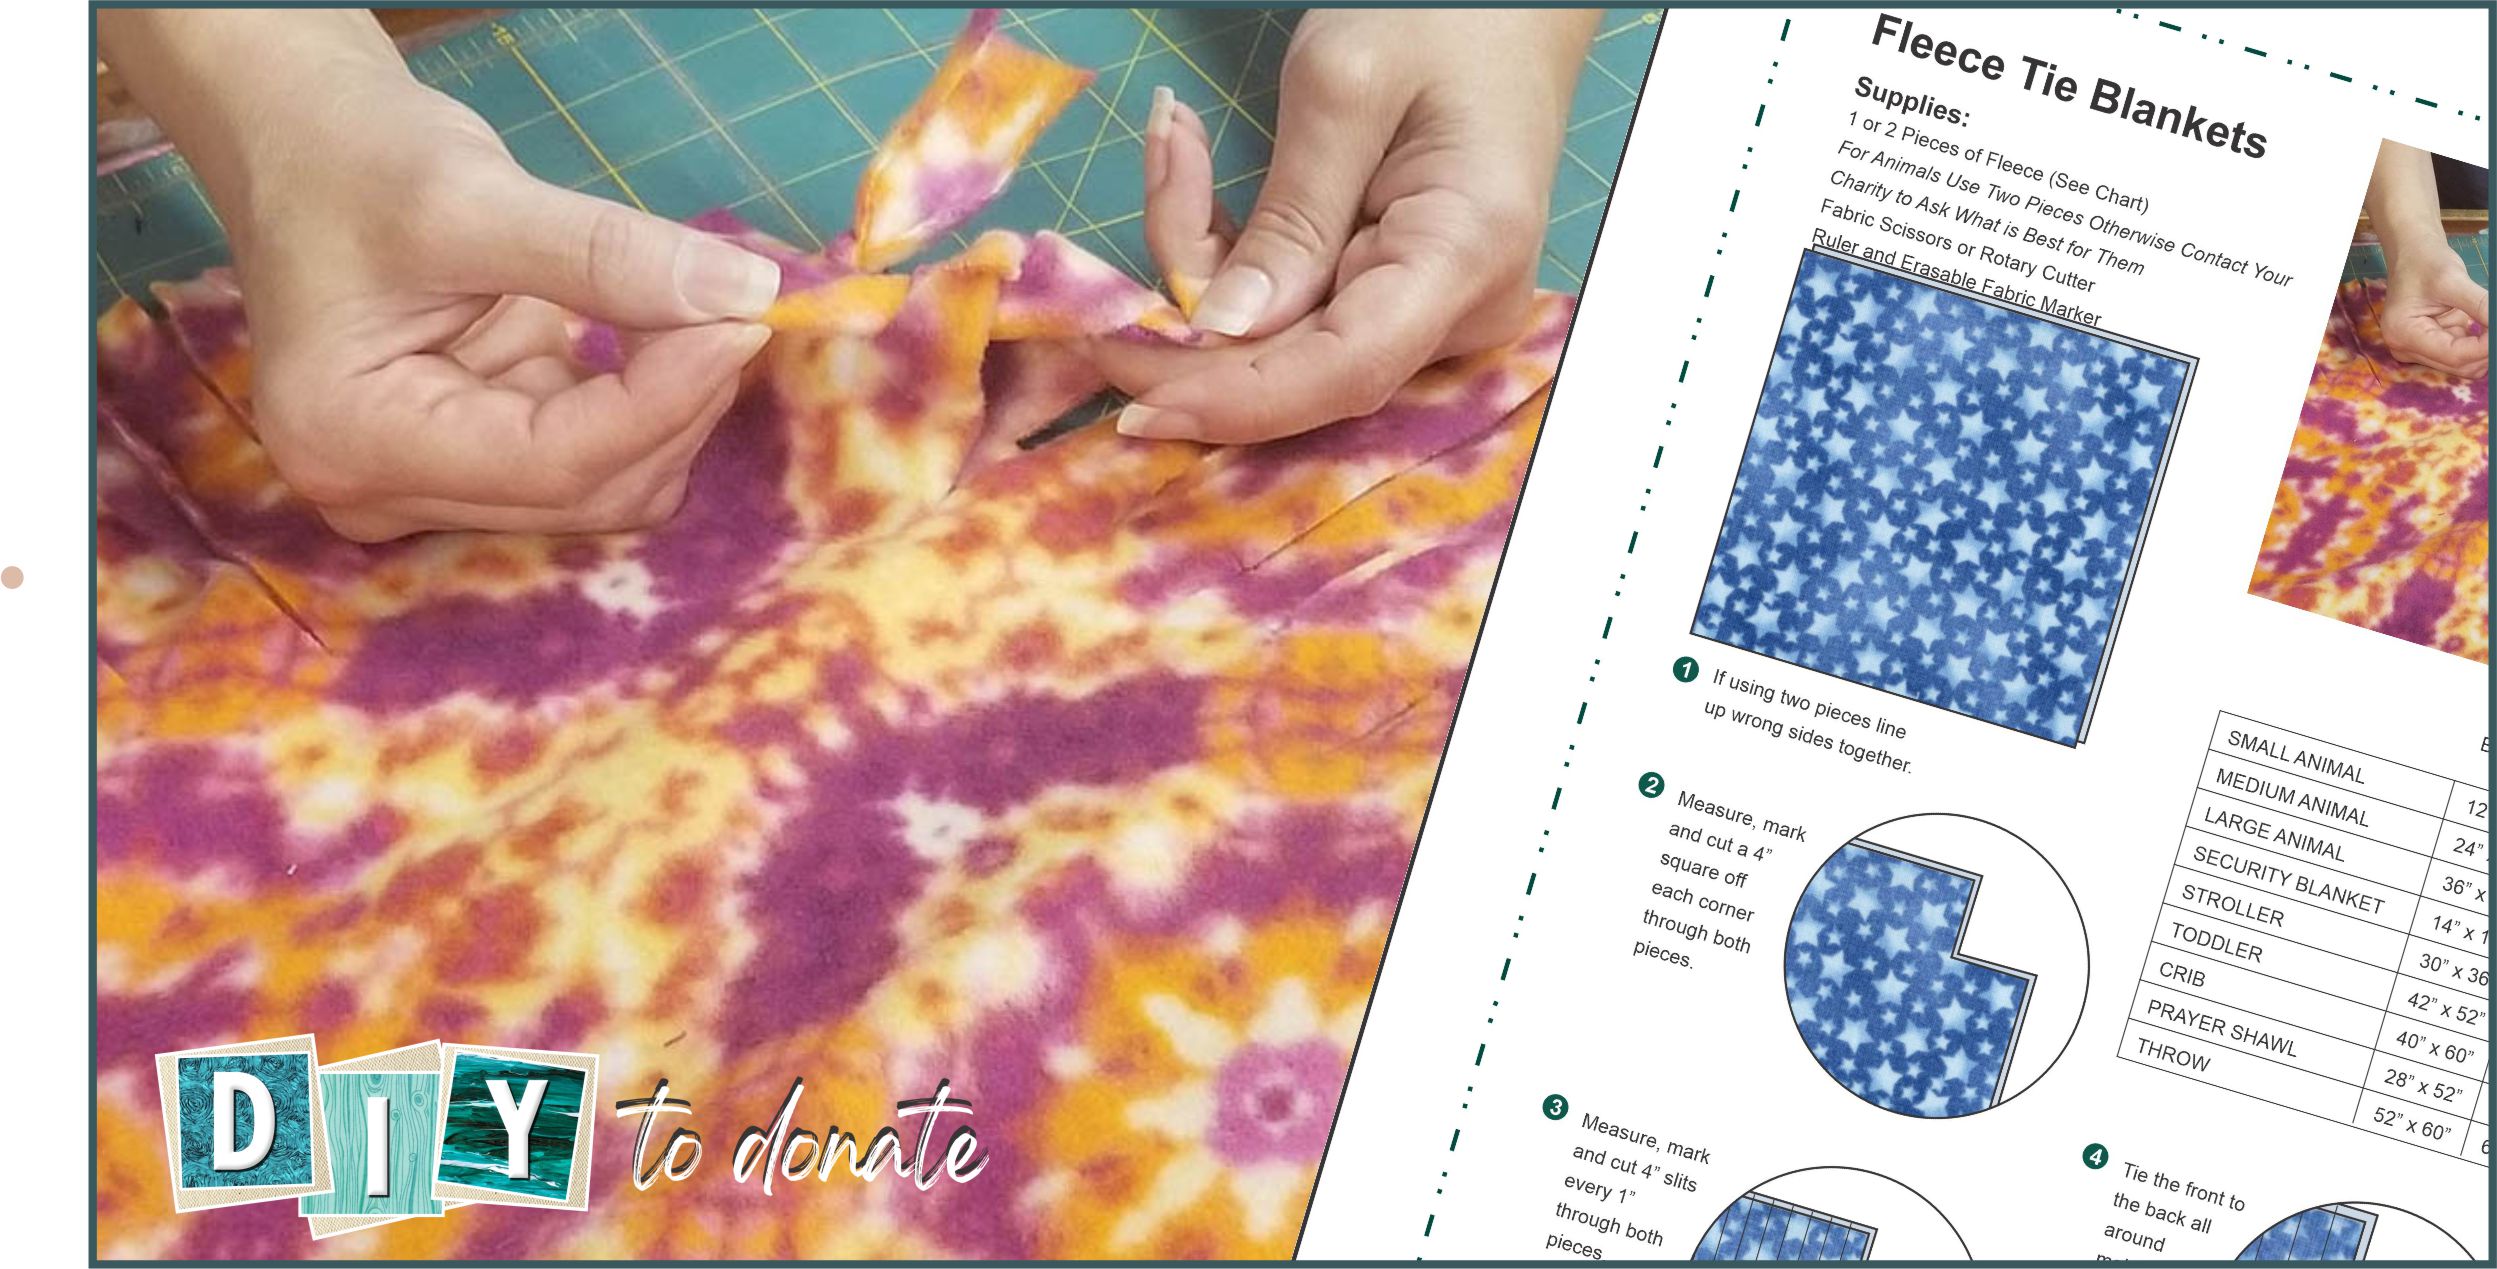 Use our handy size chart and step-by-step instructions to make fleece tie  blankets with your group and find out …